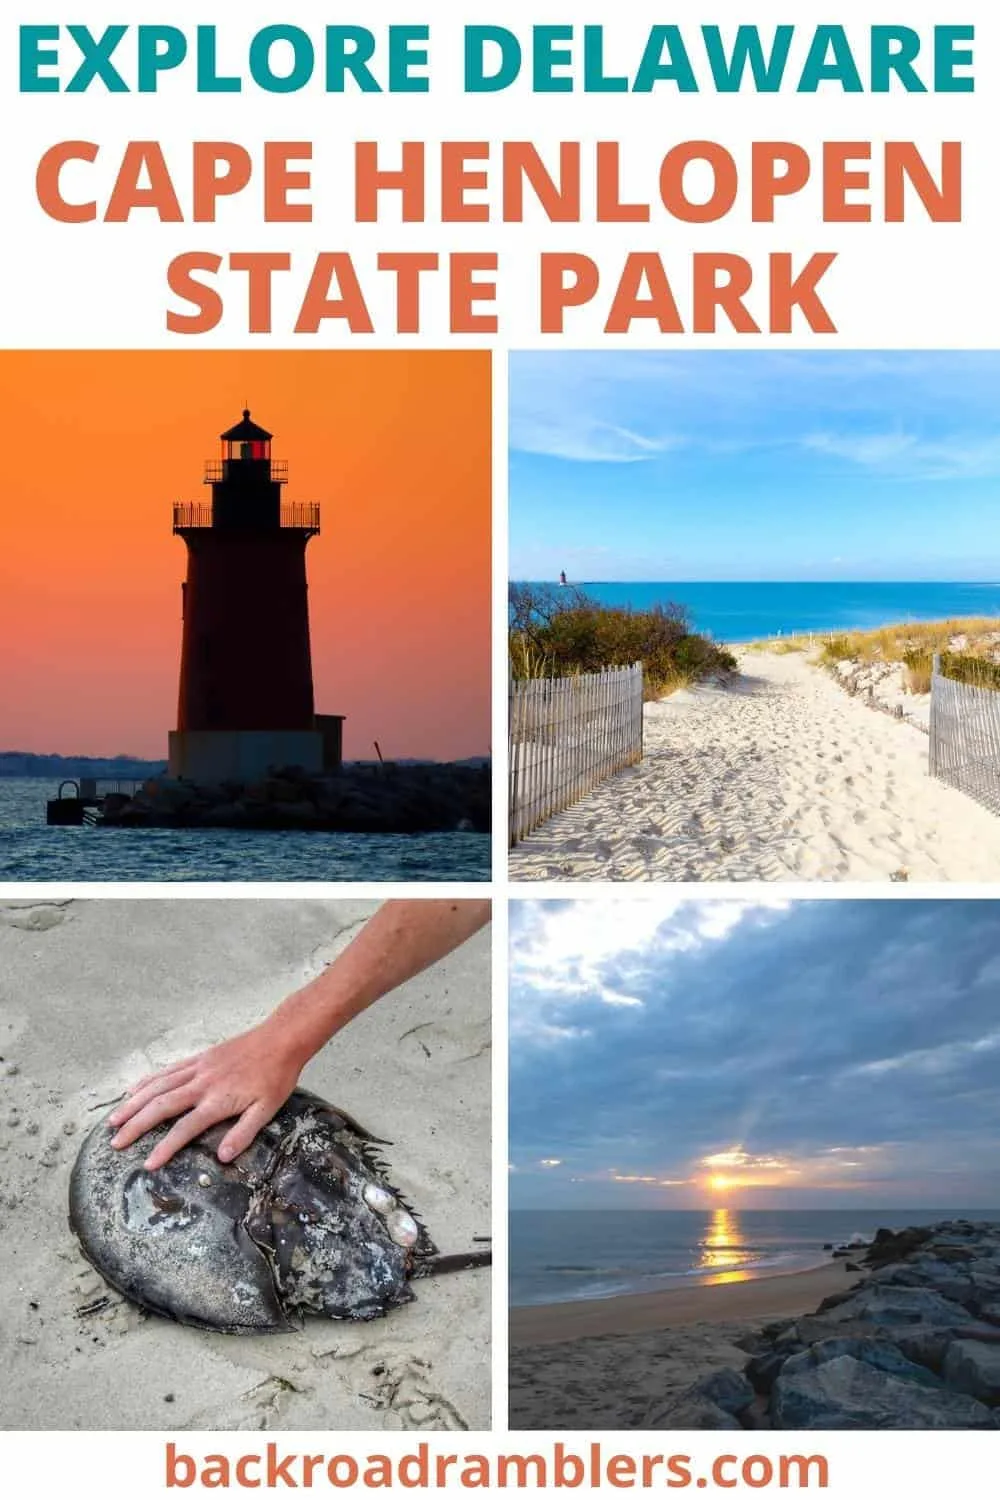 A collage of photos featuring Cape Henlopen State Park. Text overlay: Explore Delaware - Cape Henlopen State Park